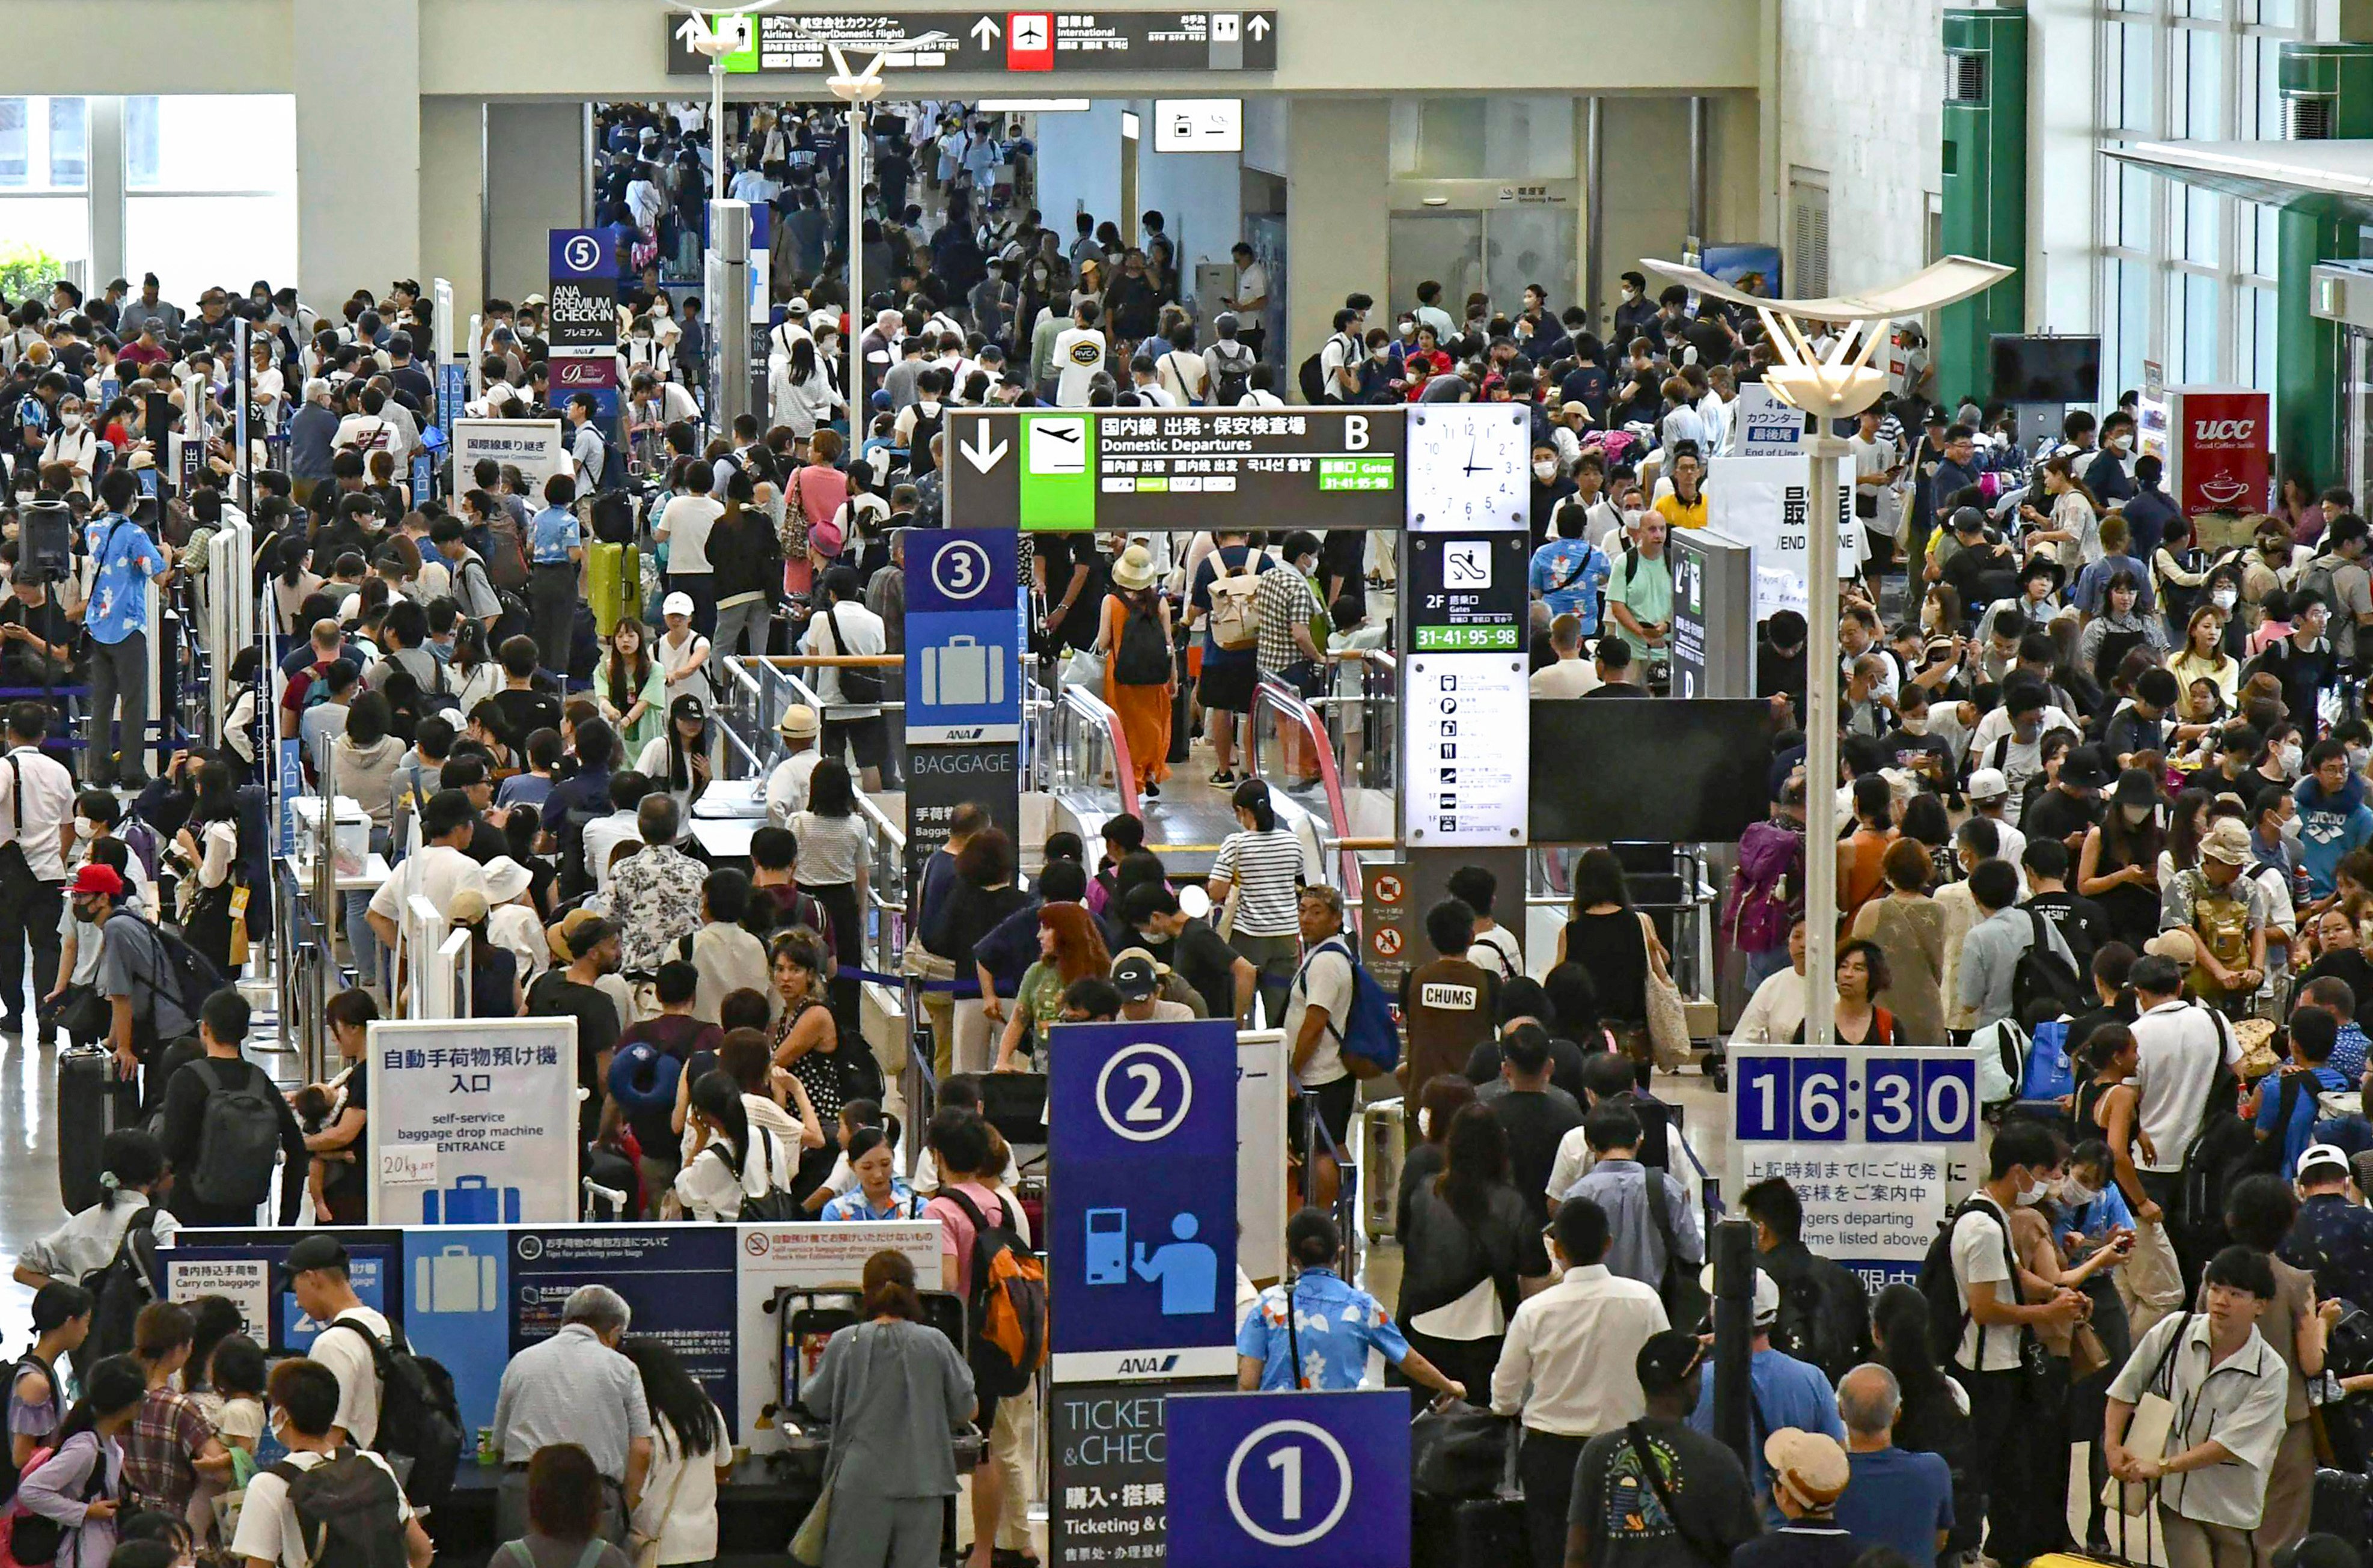 The airport is filled with people waiting for flights following cancellations caused by a typhoon hitting Okinawa in Japan. Photo: AP